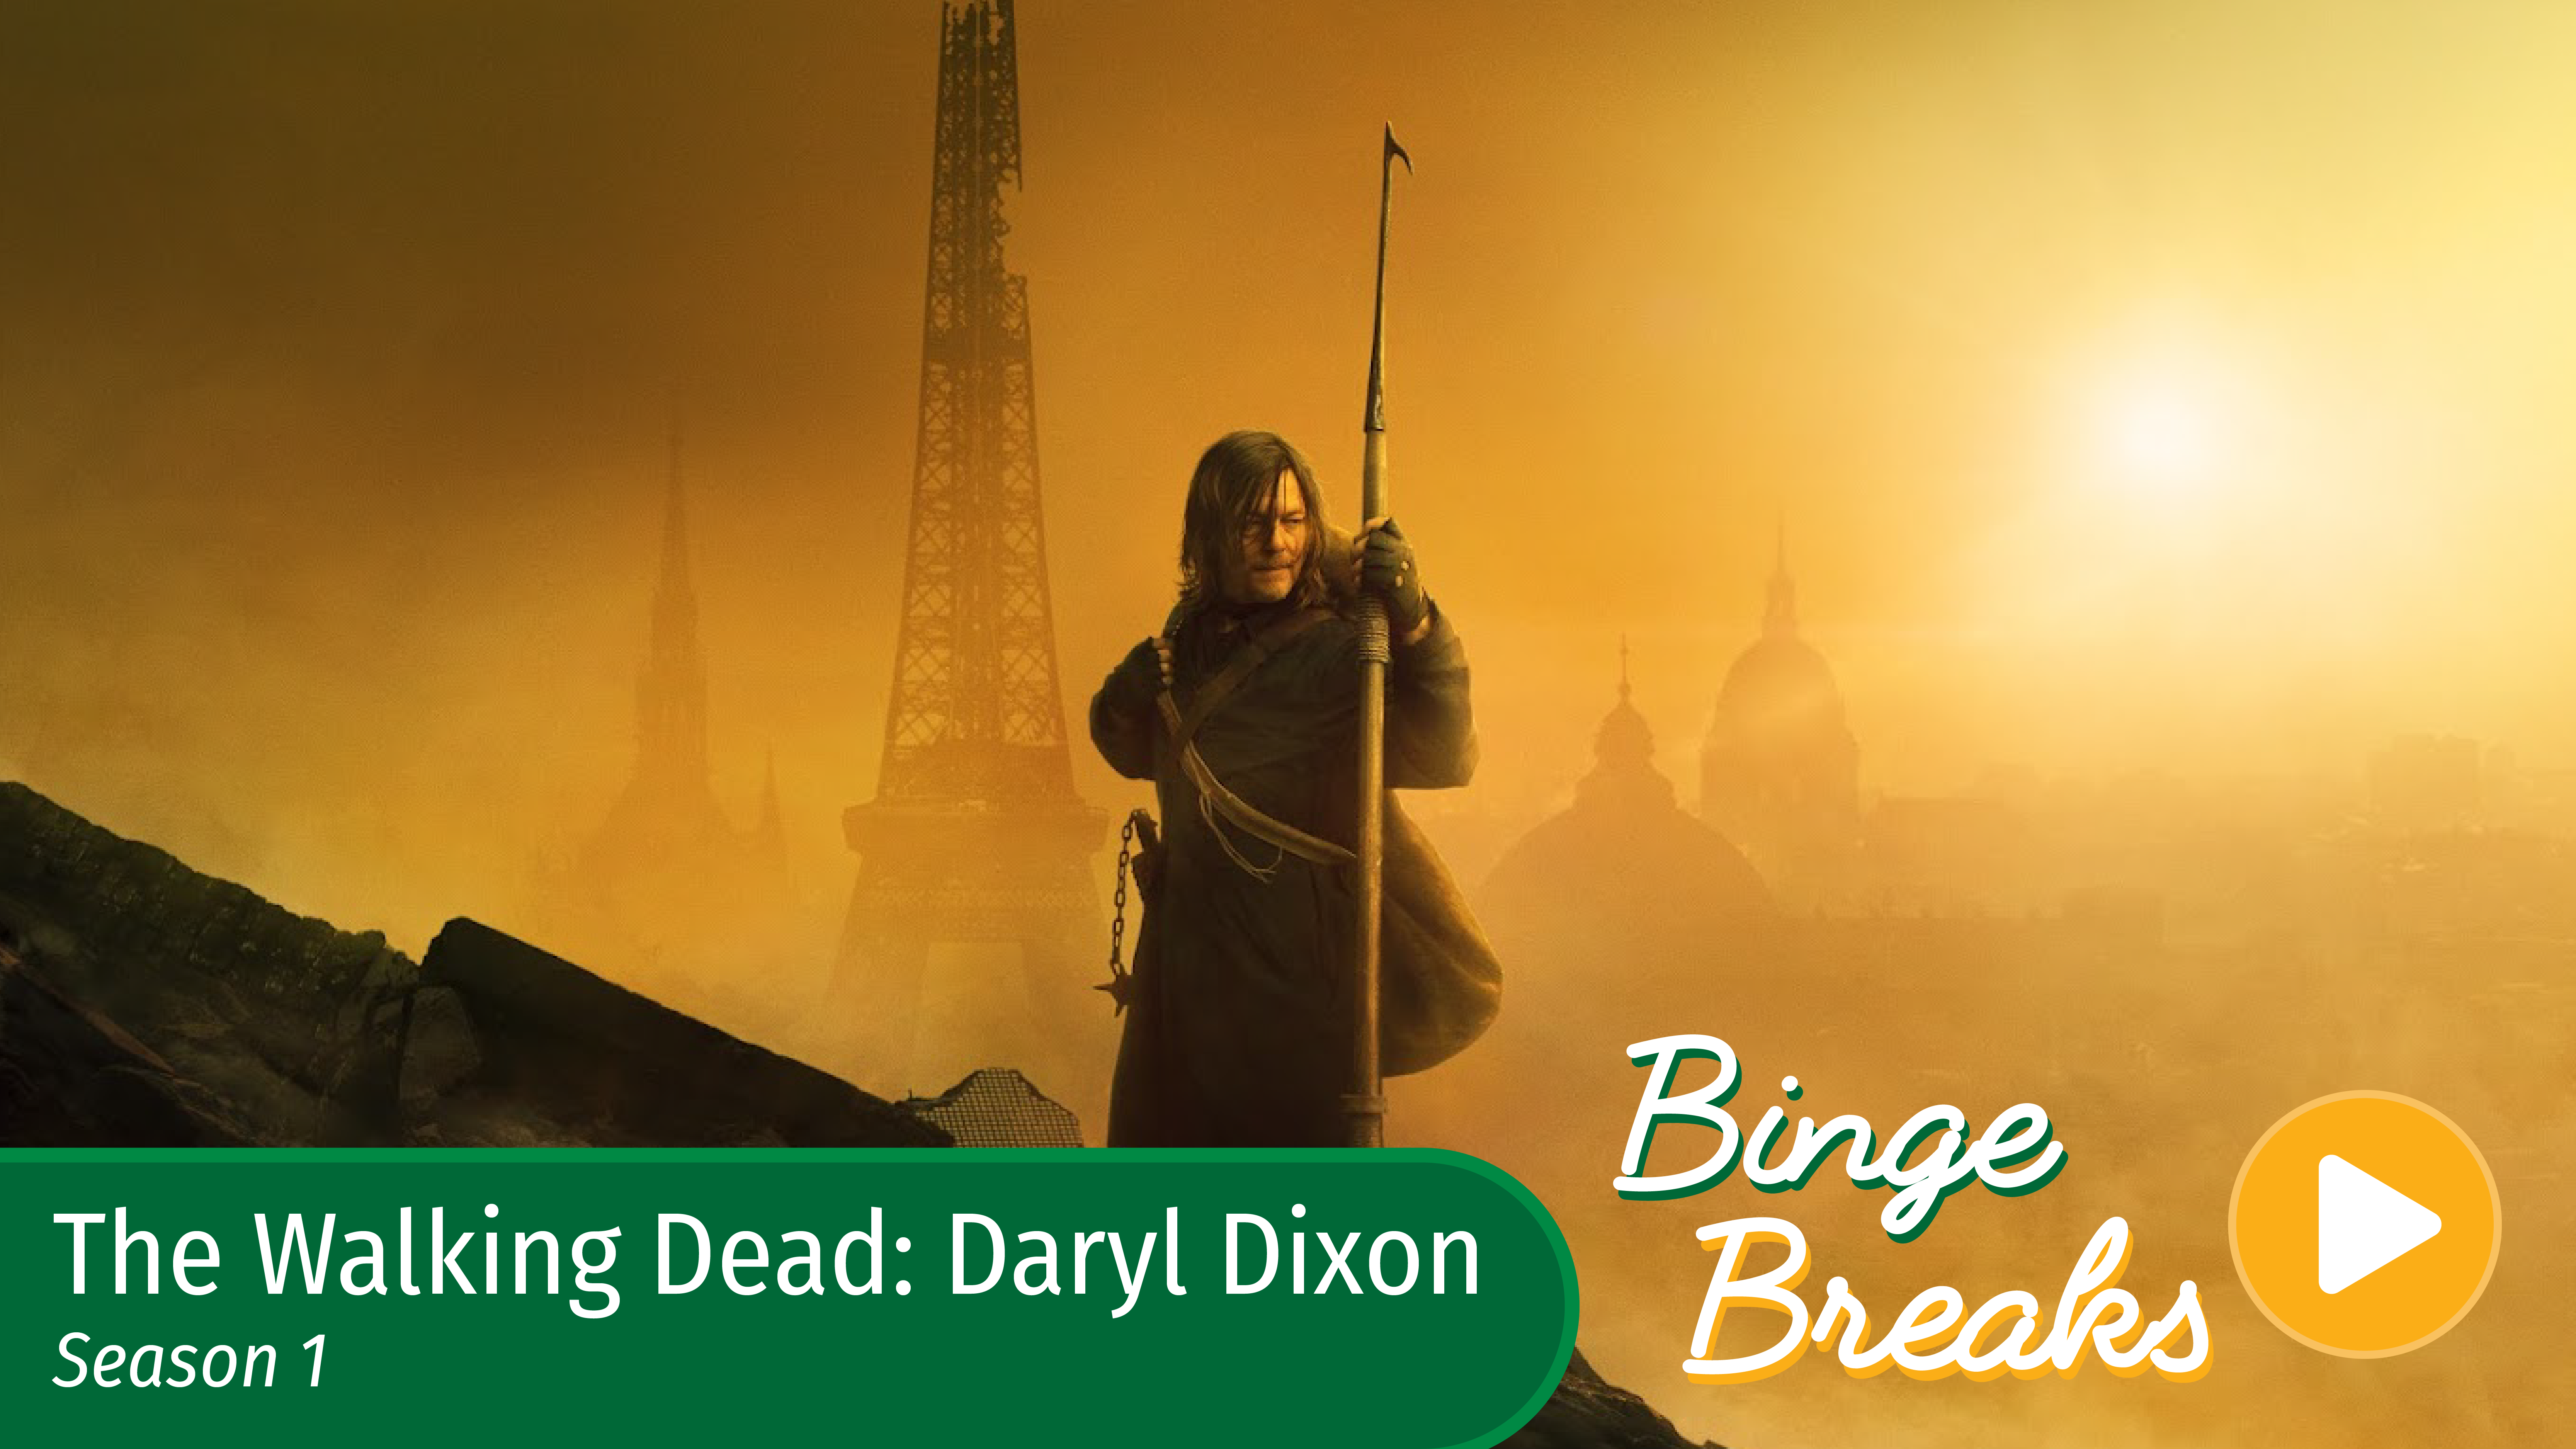 Binge Breaks: The Walking Dead: Daryl Dixon expands the universe and the character